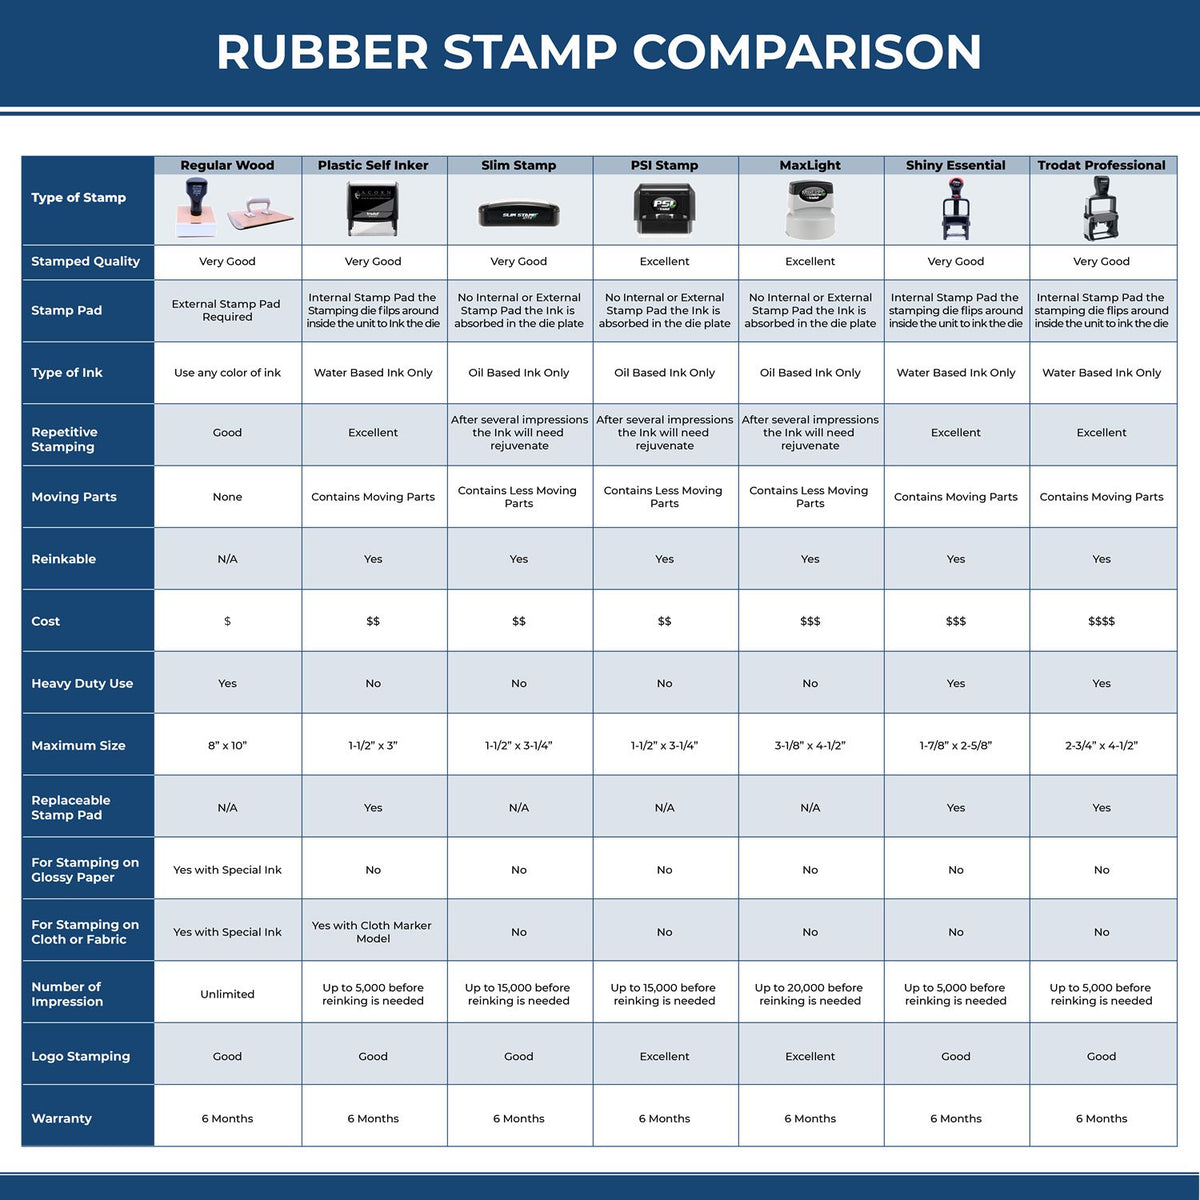 Large Temporarily Closed Rubber Stamp 5502R Rubber Stamp Comparison